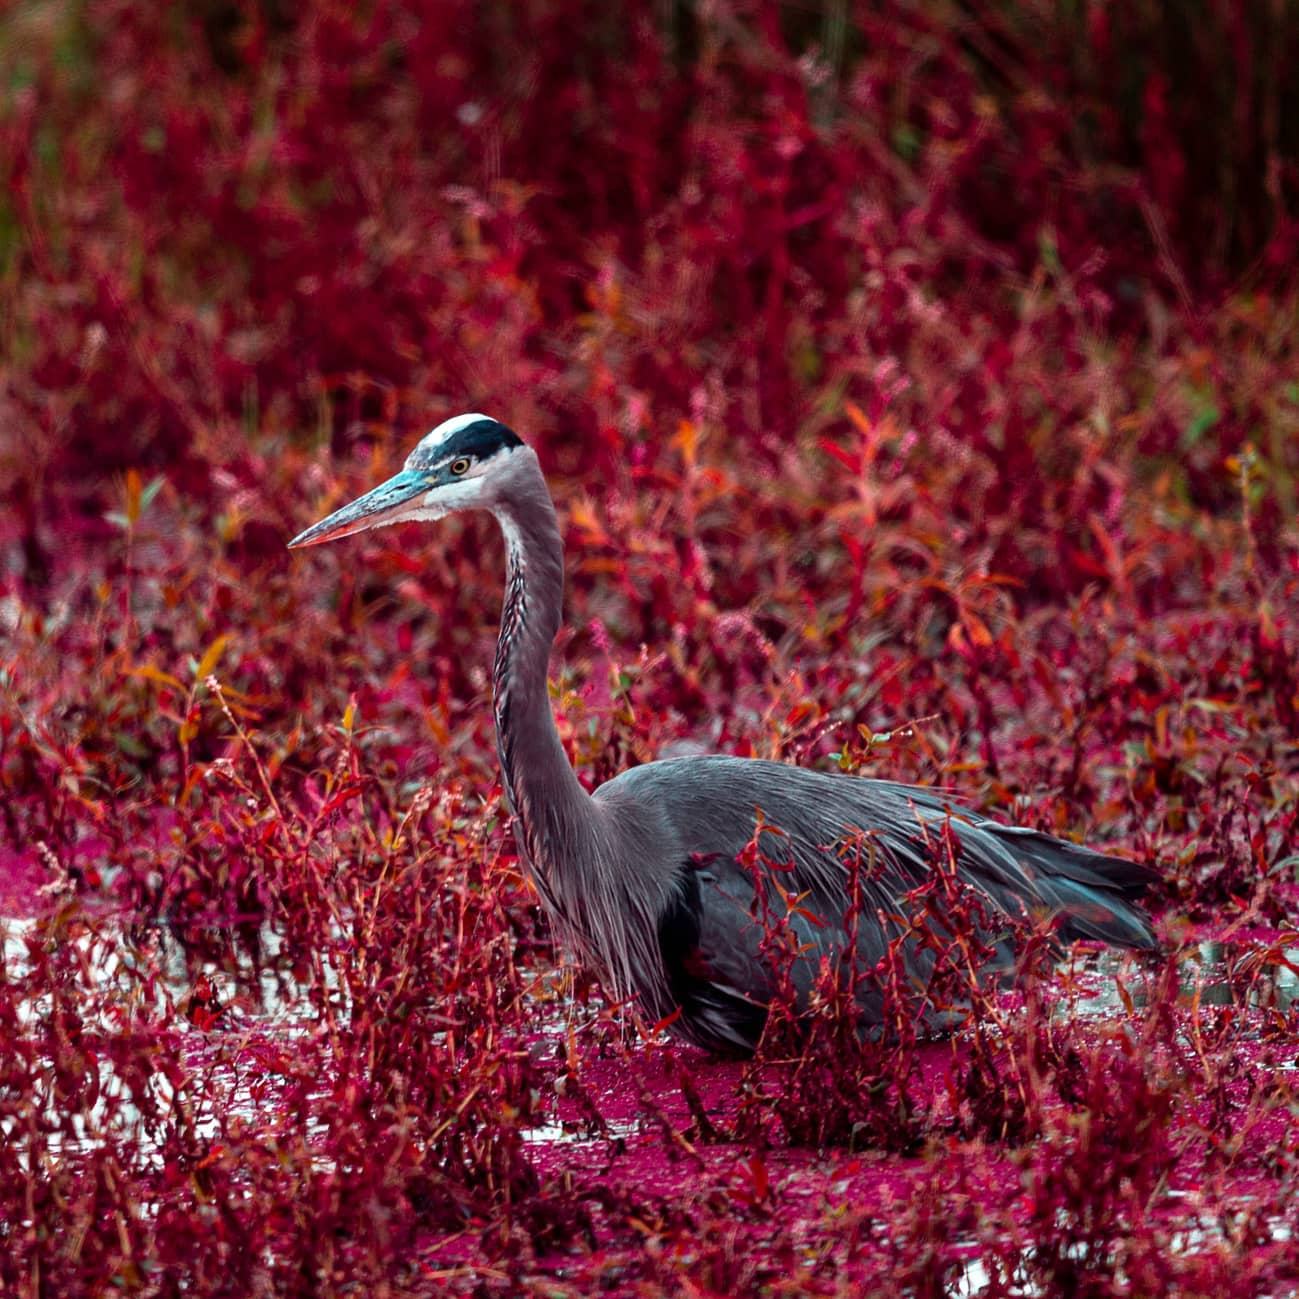 Heron in red foliage. Photo by Instagram user @mekuna_photography.